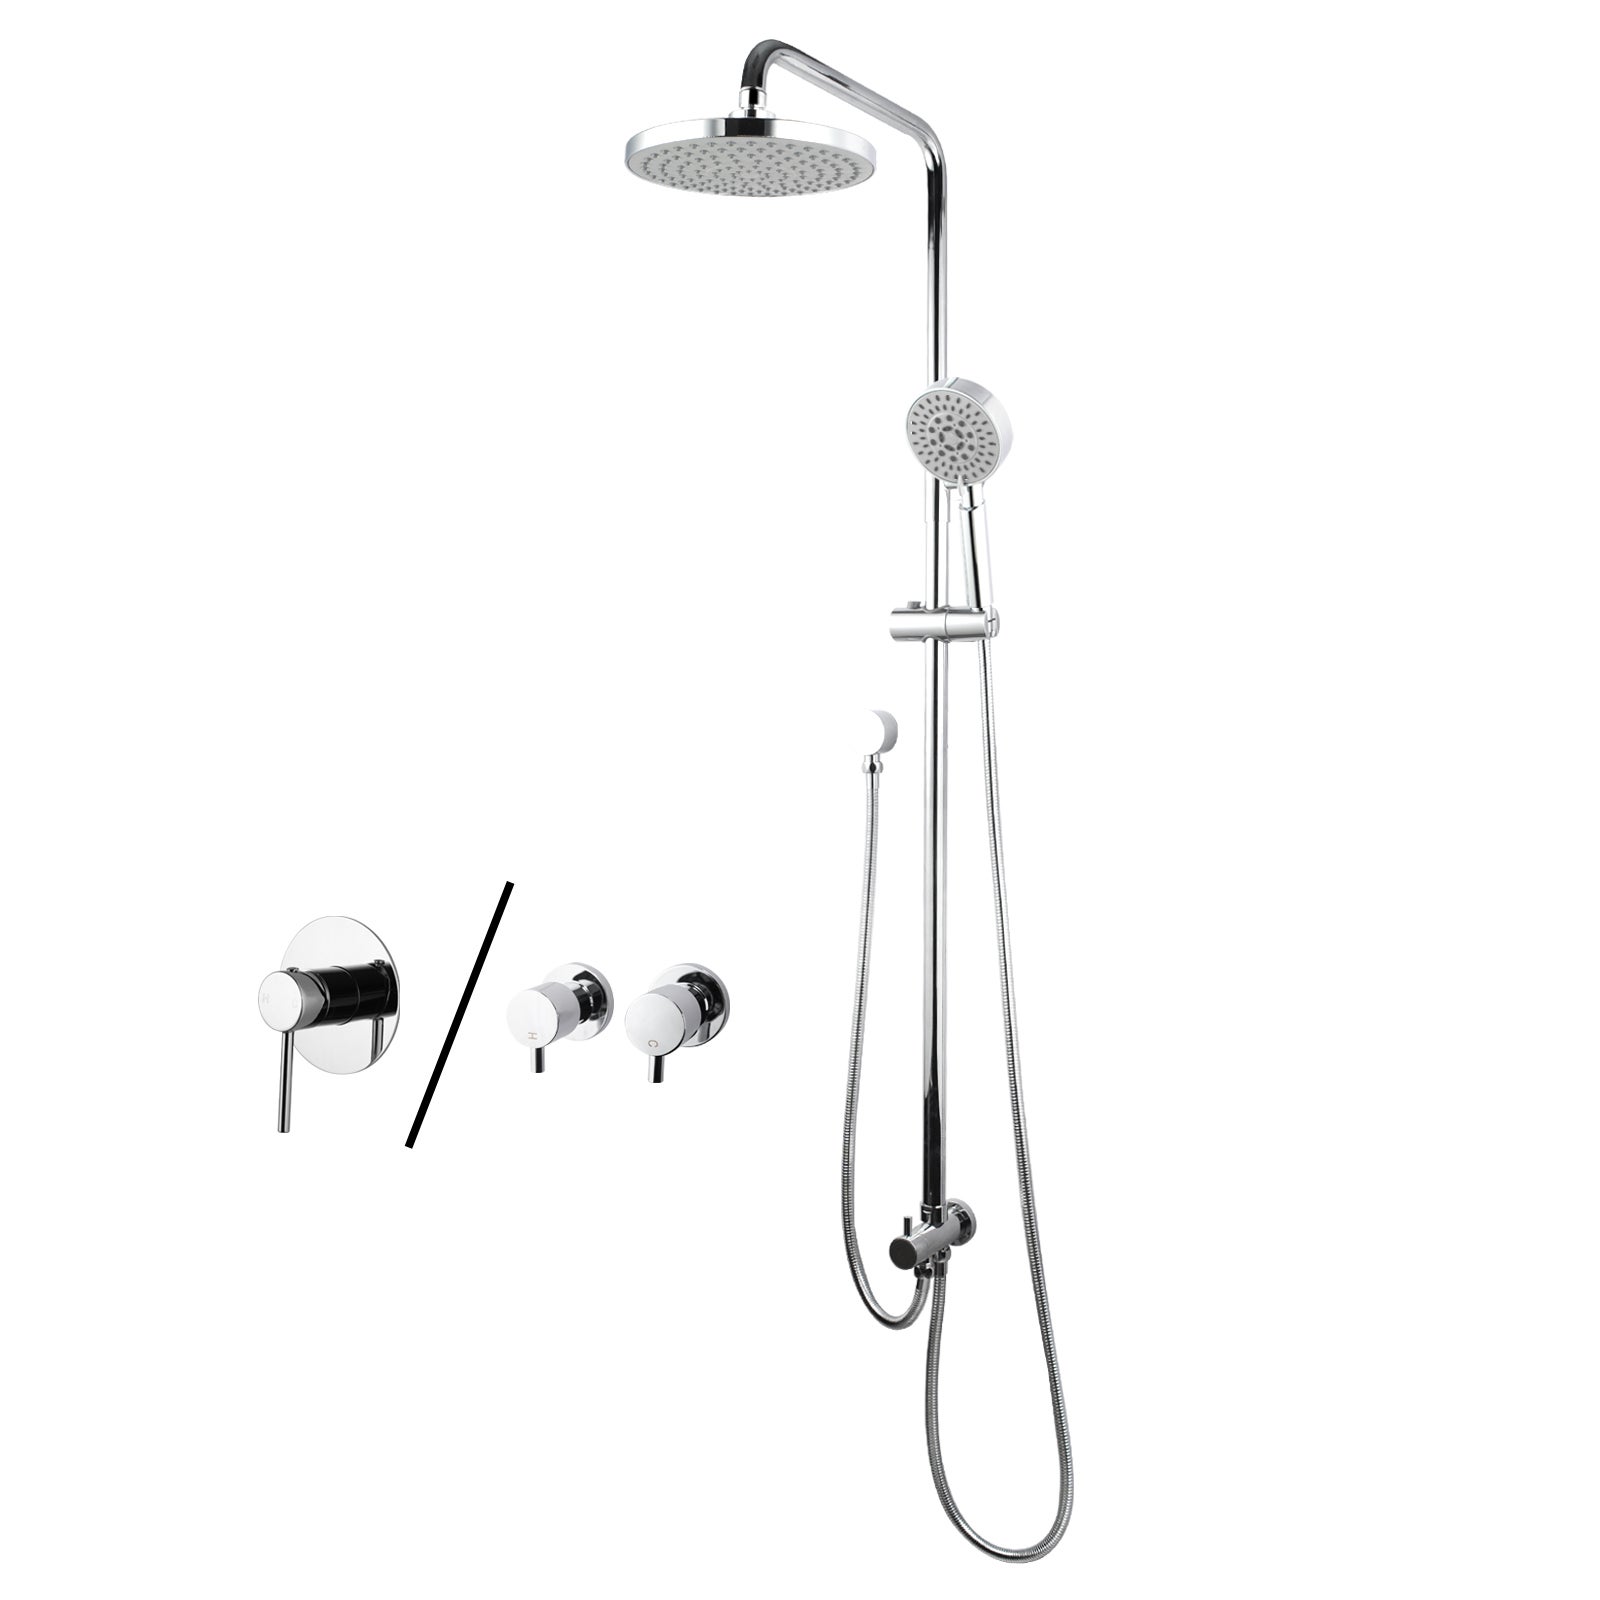 ACA Bathroom 8' Round Chrome Shower Station Top/Bottom Water Inlet with Handheld Shower / with Mixer Taps